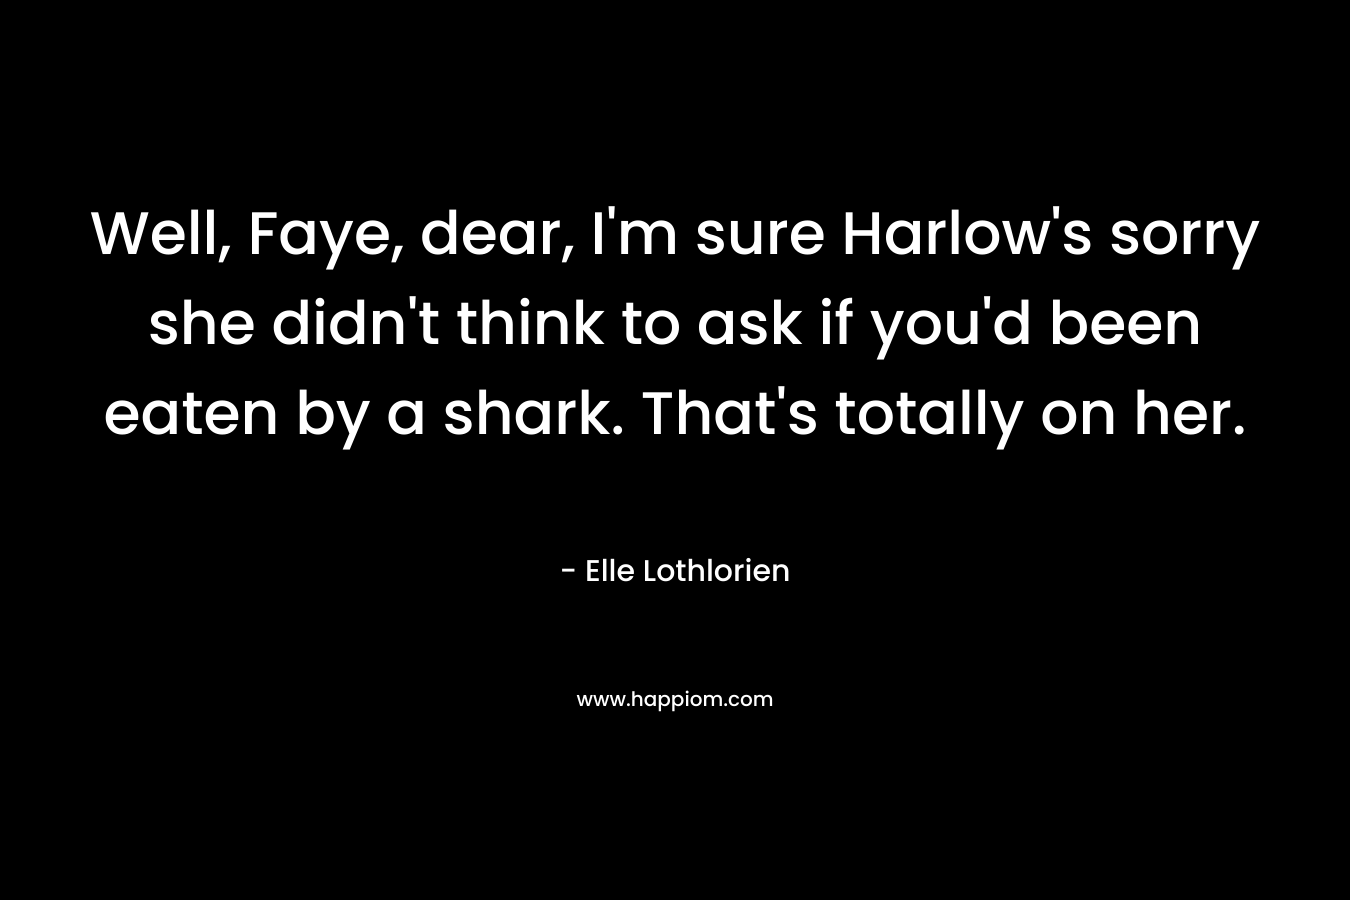 Well, Faye, dear, I’m sure Harlow’s sorry she didn’t think to ask if you’d been eaten by a shark. That’s totally on her. – Elle Lothlorien